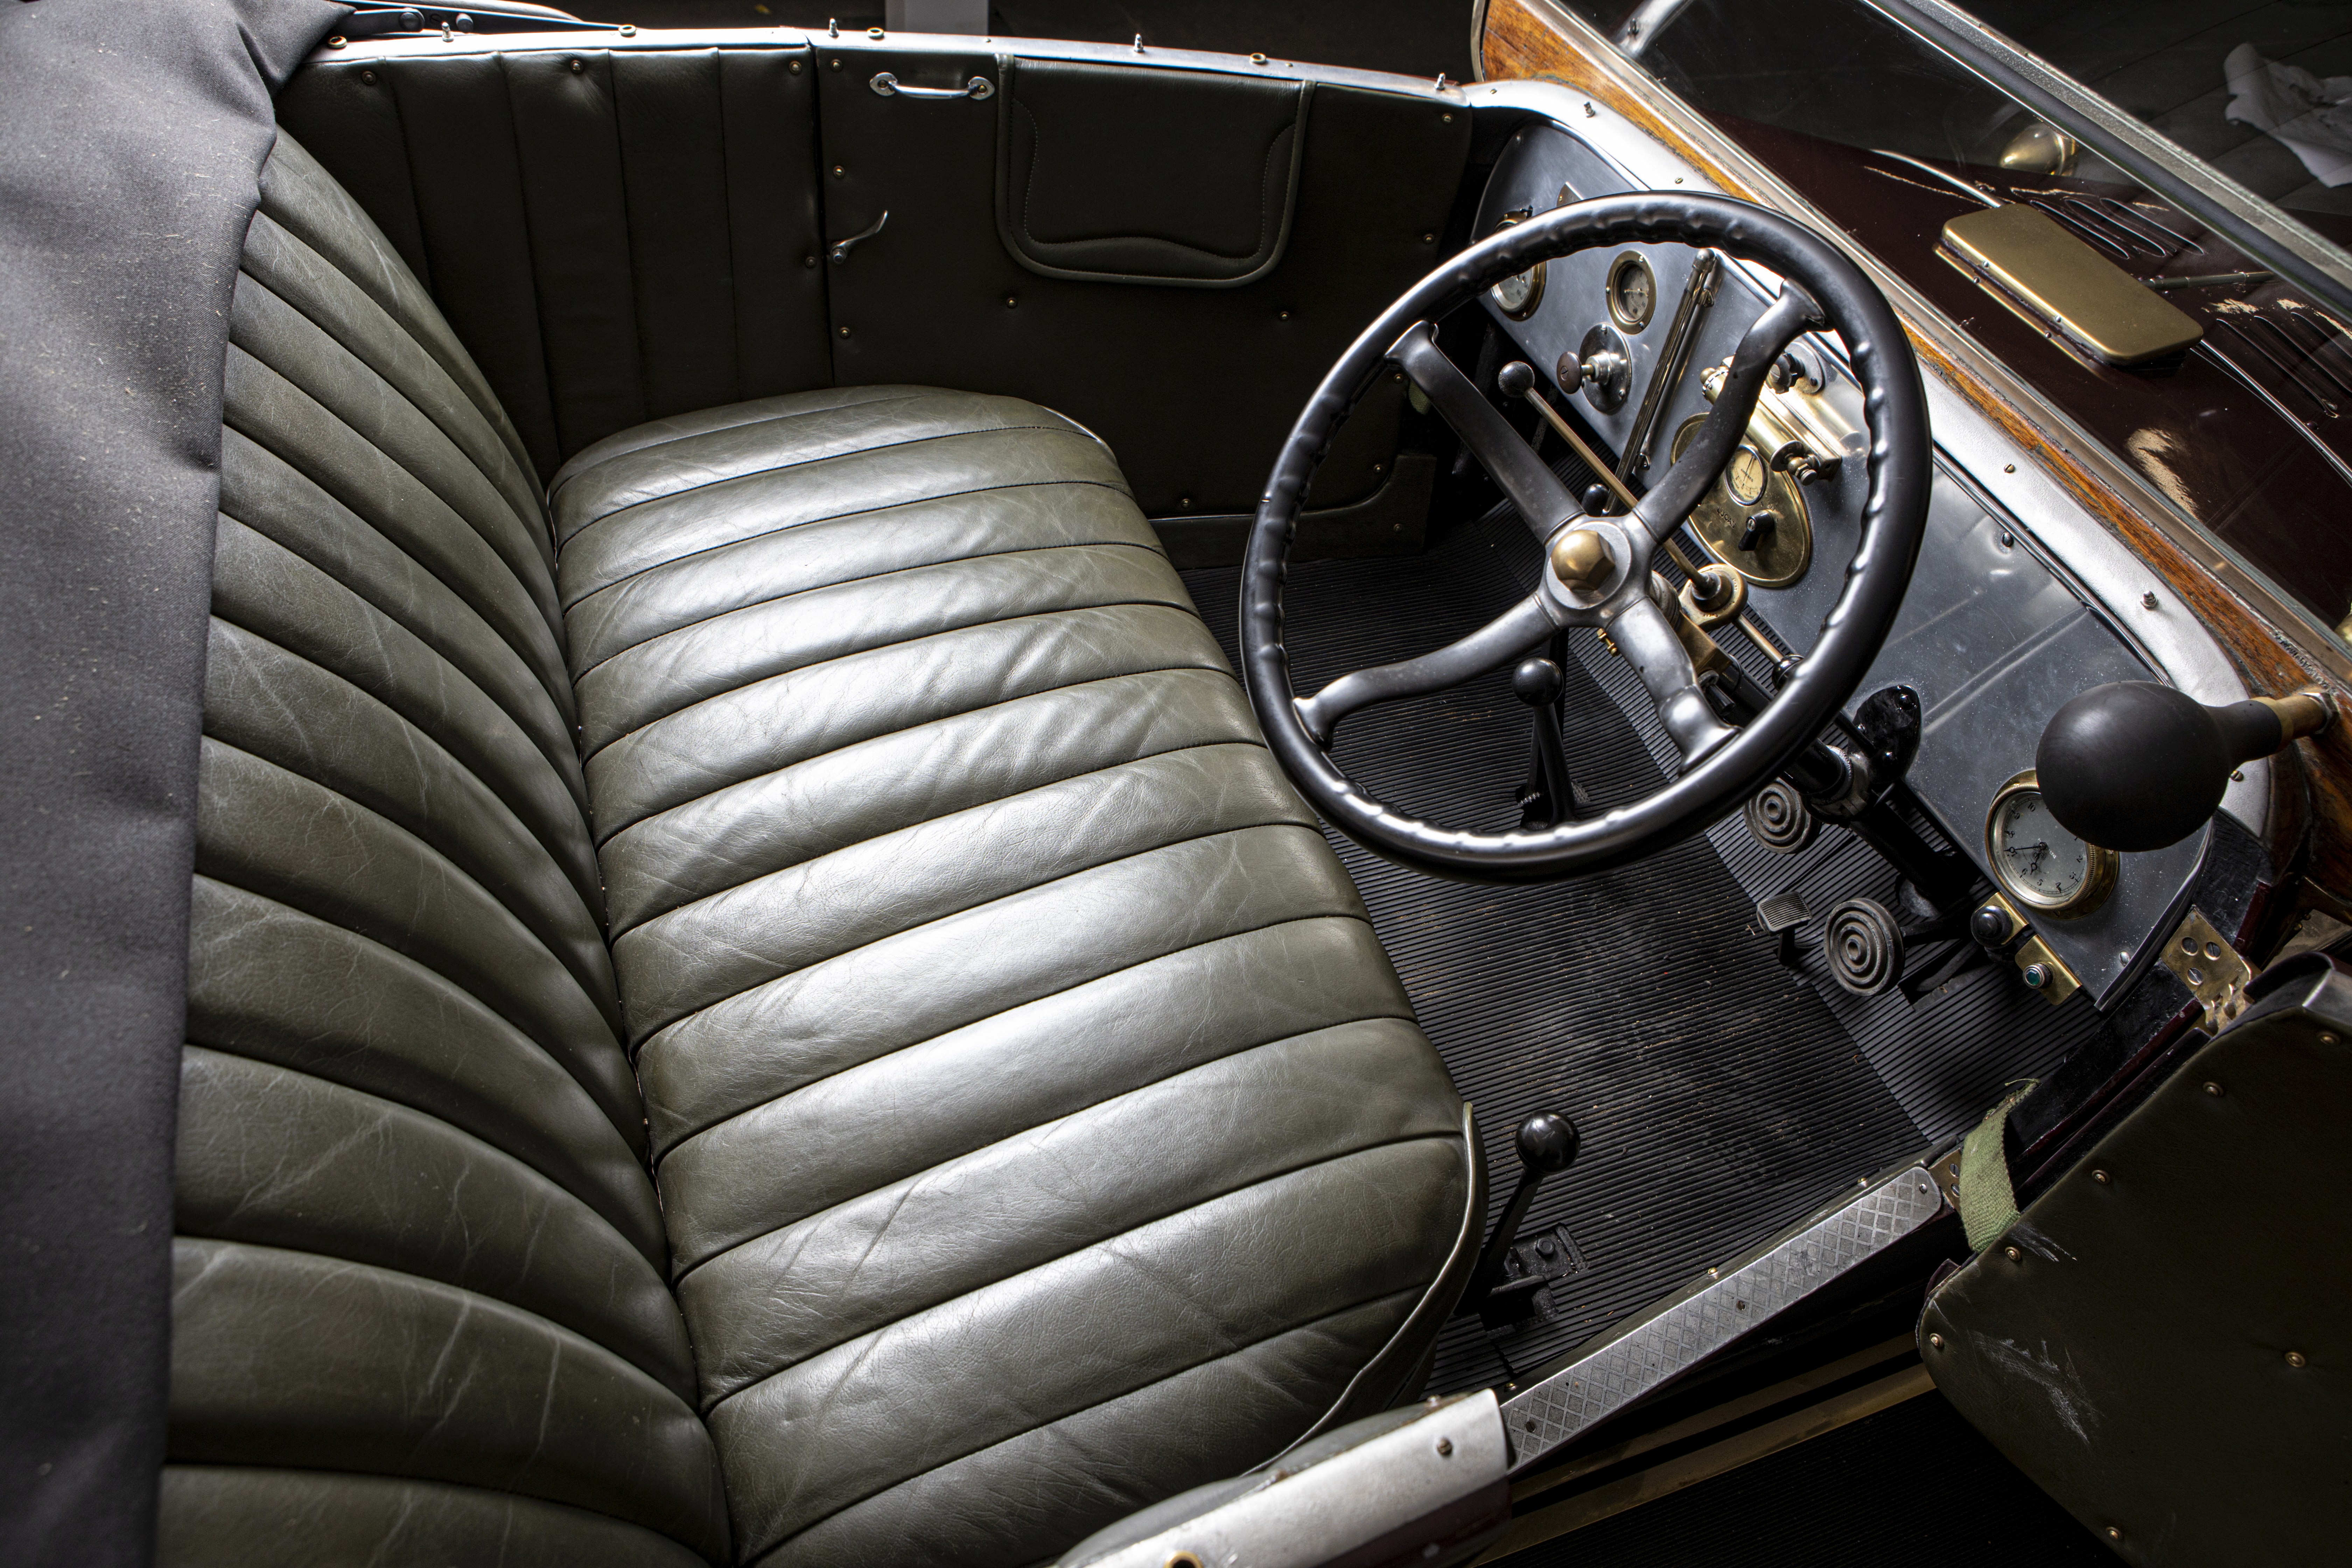 1926 Morris Oxford 'Bullnose' Doctor's Coupé with Dickey Seat Chassis no. 1417766 - Image 5 of 22